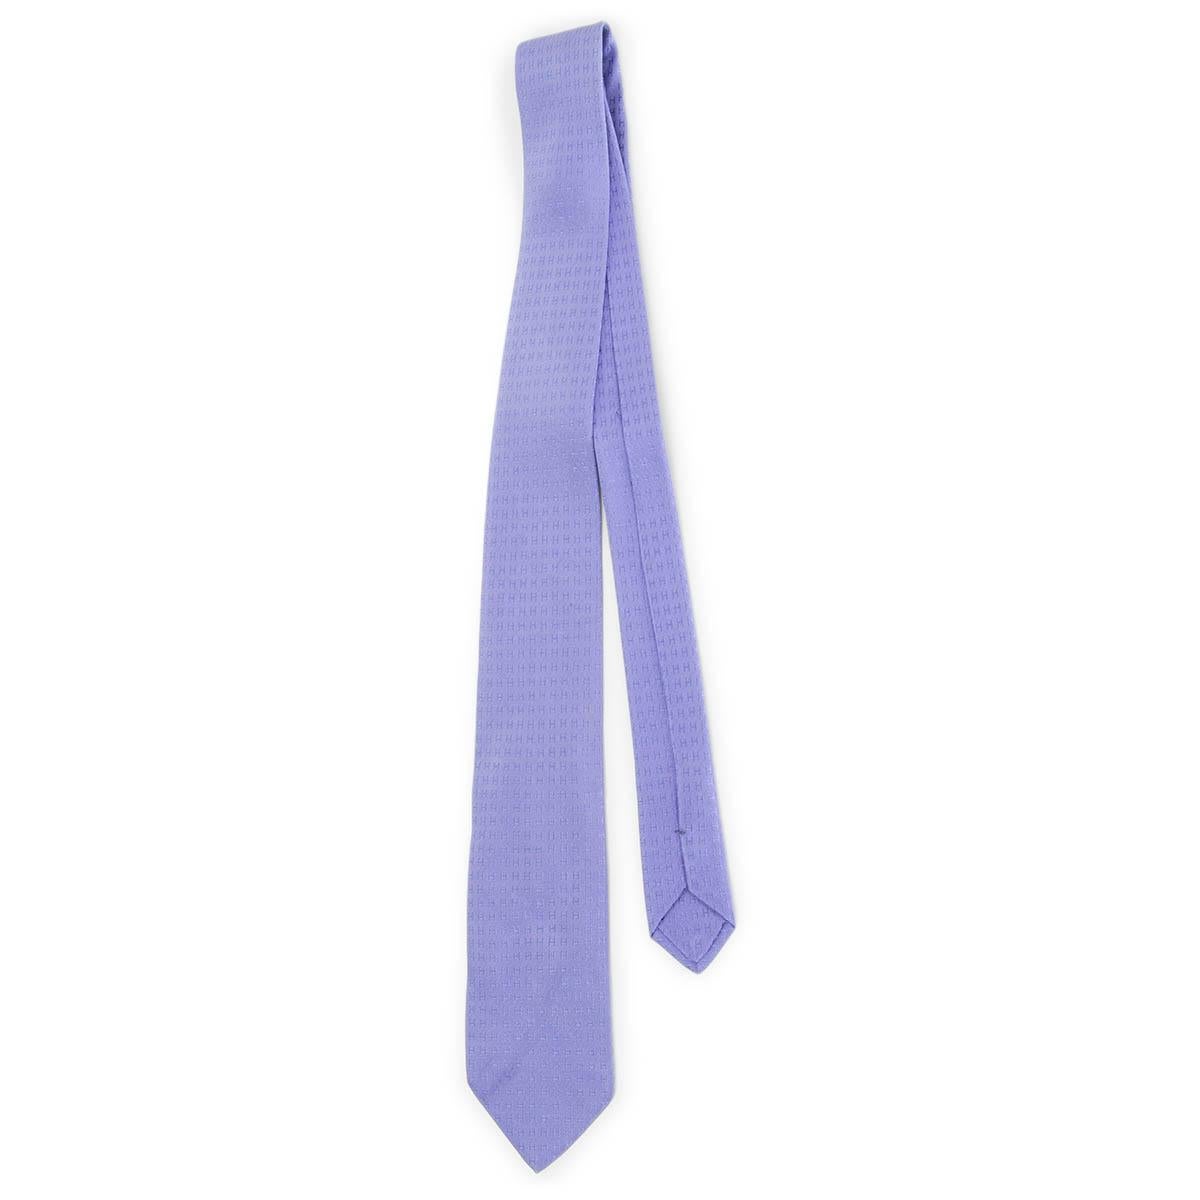 100% authentic Hermès purple 'Faconnee H Tie' designed in silk (100%) with 'H' detail throughout. Has been worn and is in excellent condition. No Box.

Measurements
Width	8cm (3.1in)
Length	150cm (58.5in)

All our listings include only the listed